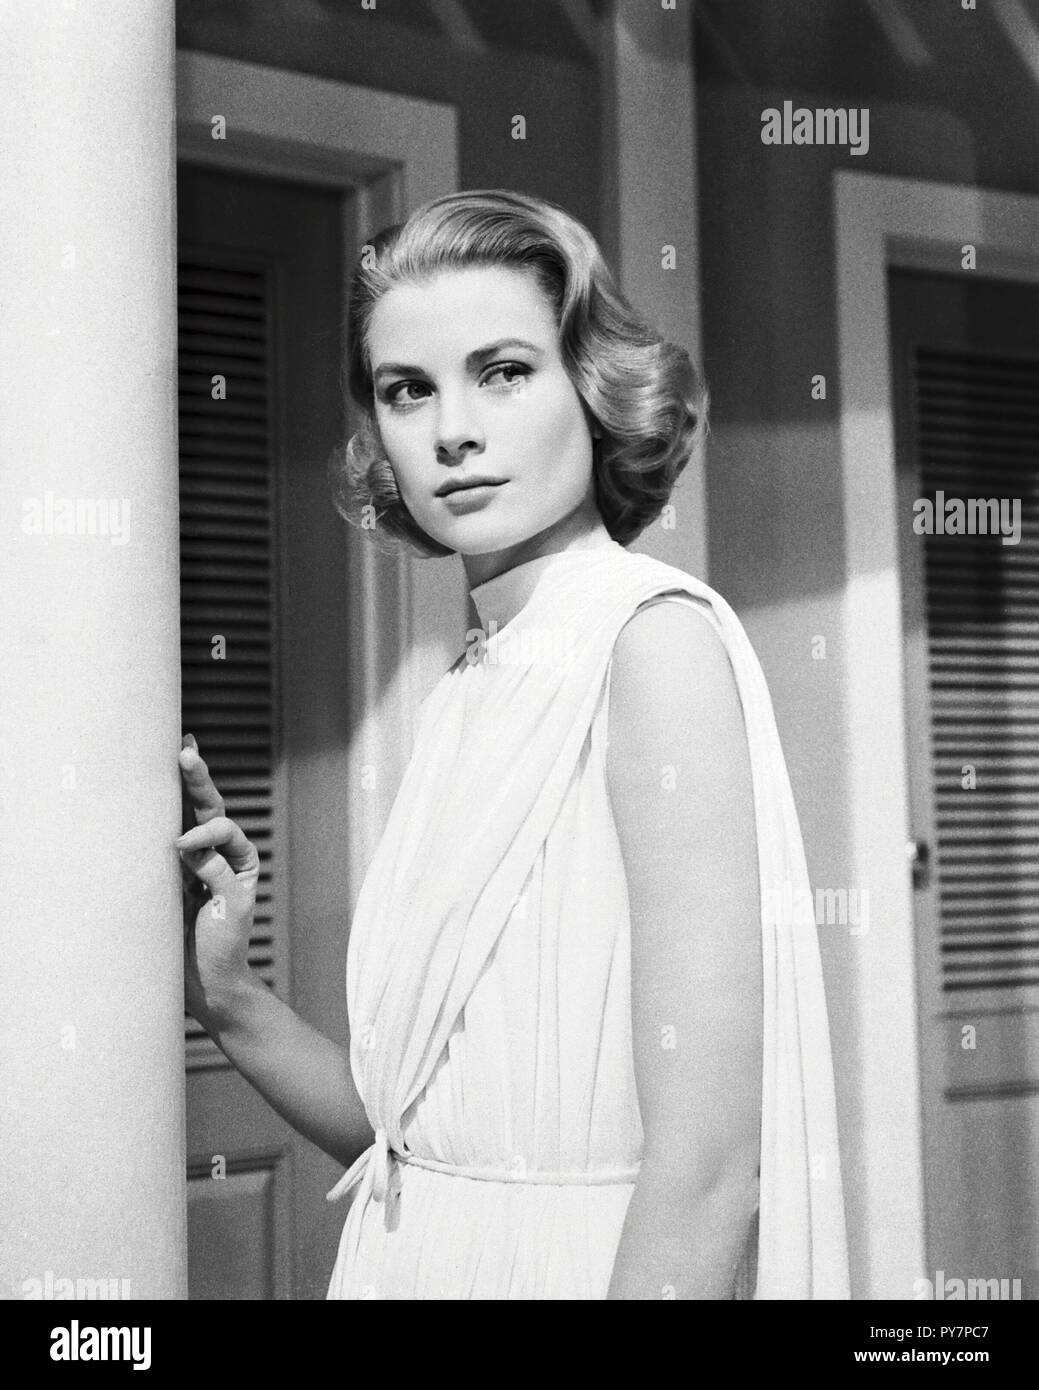 Original film title: HIGH SOCIETY. English title: HIGH SOCIETY. Year: 1956. Director: CHARLES WALTERS. Stars: GRACE KELLY. Credit: M.G.M. / Album Stock Photo